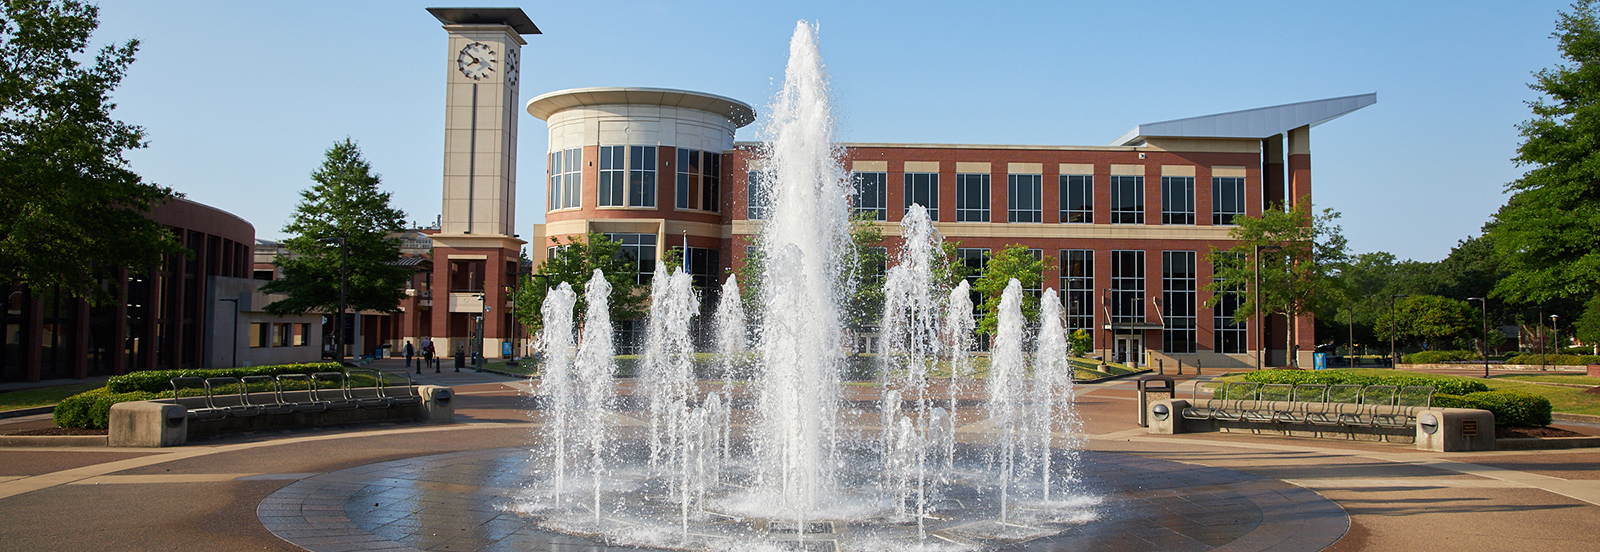 Front of the UofM University Center with Fountain in the Foreground